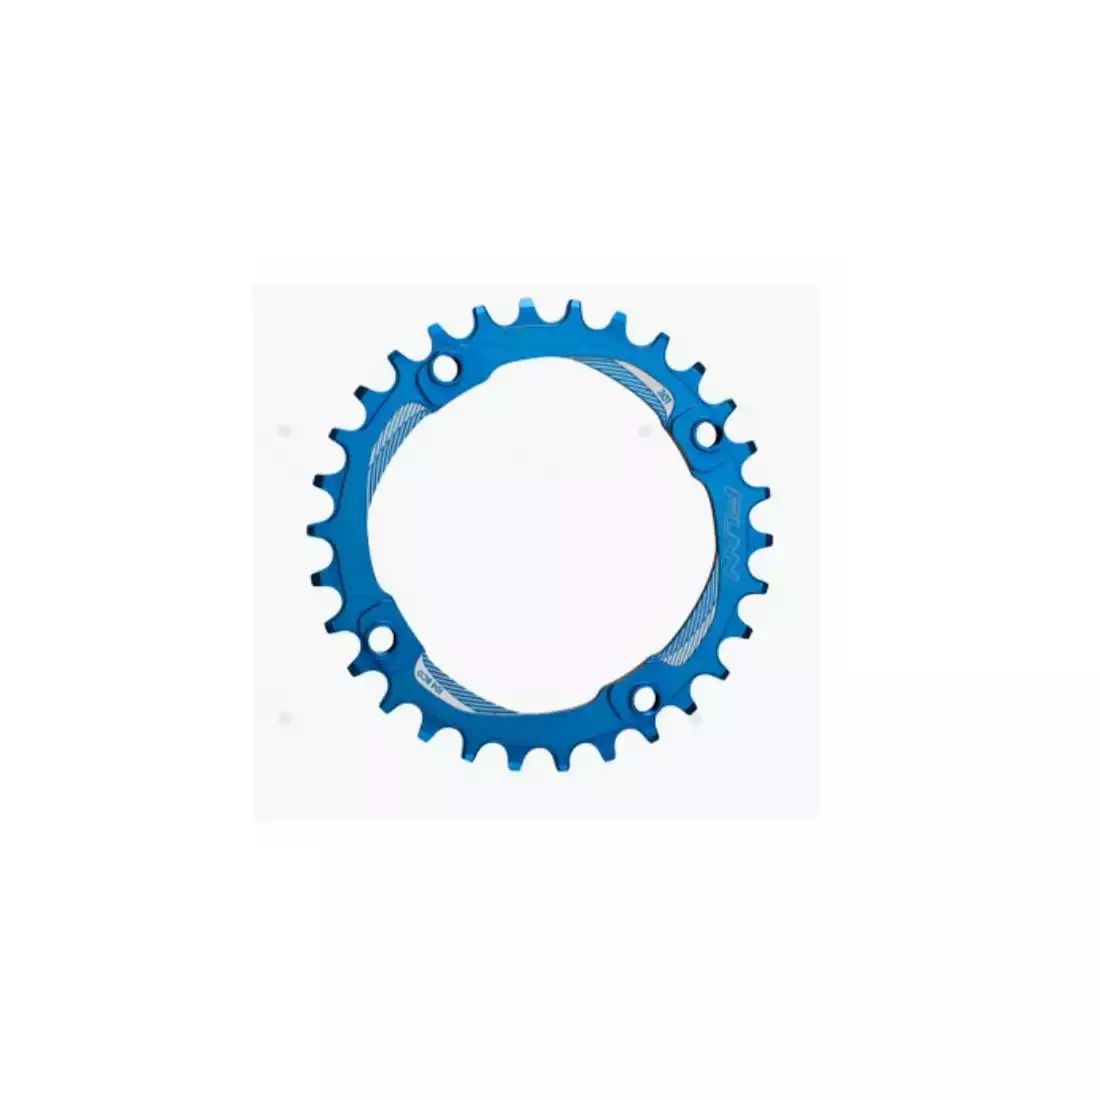 FUNN SOLO BCD NARROW WIDE sprocket for cranks 32T blue